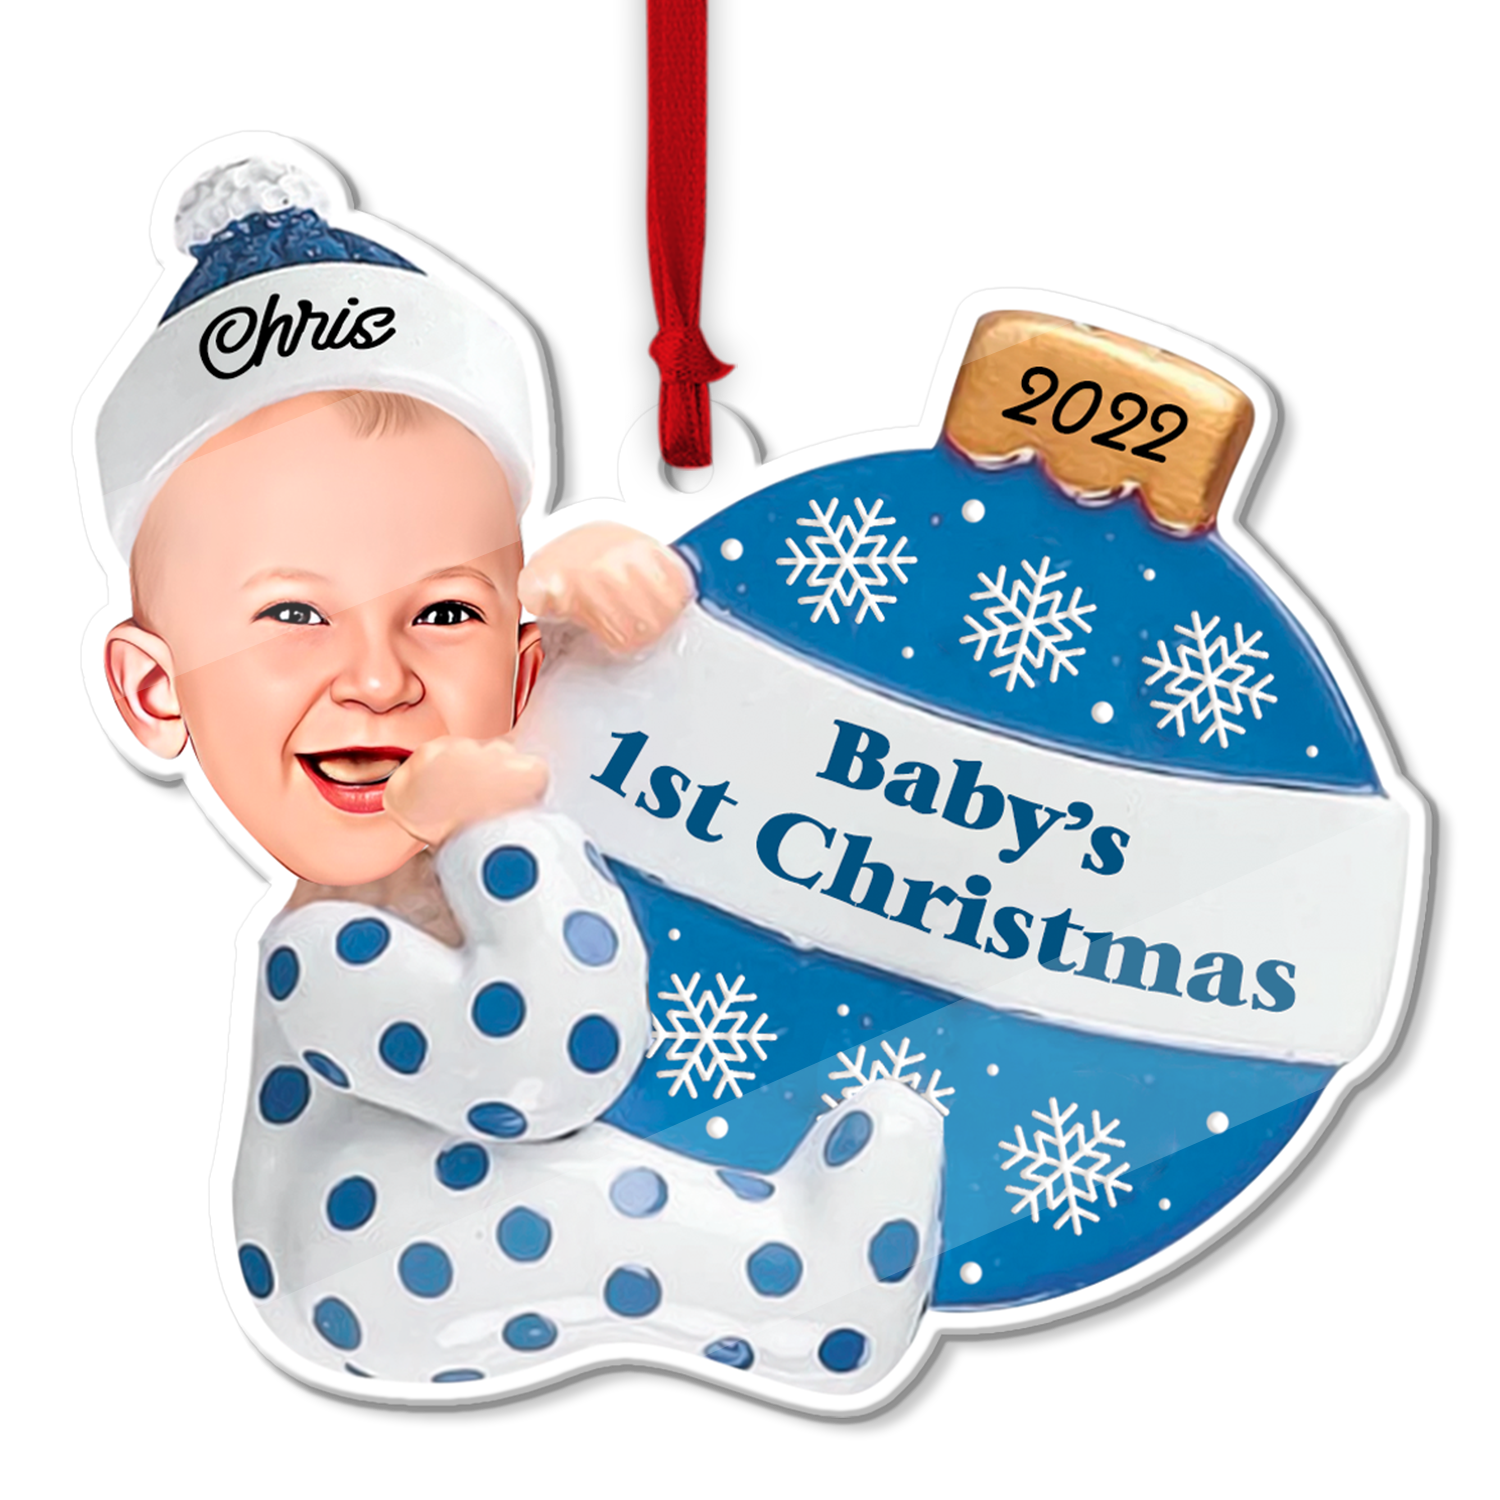 560 Art - Babies ideas  baby clip art, baby cards, baby images